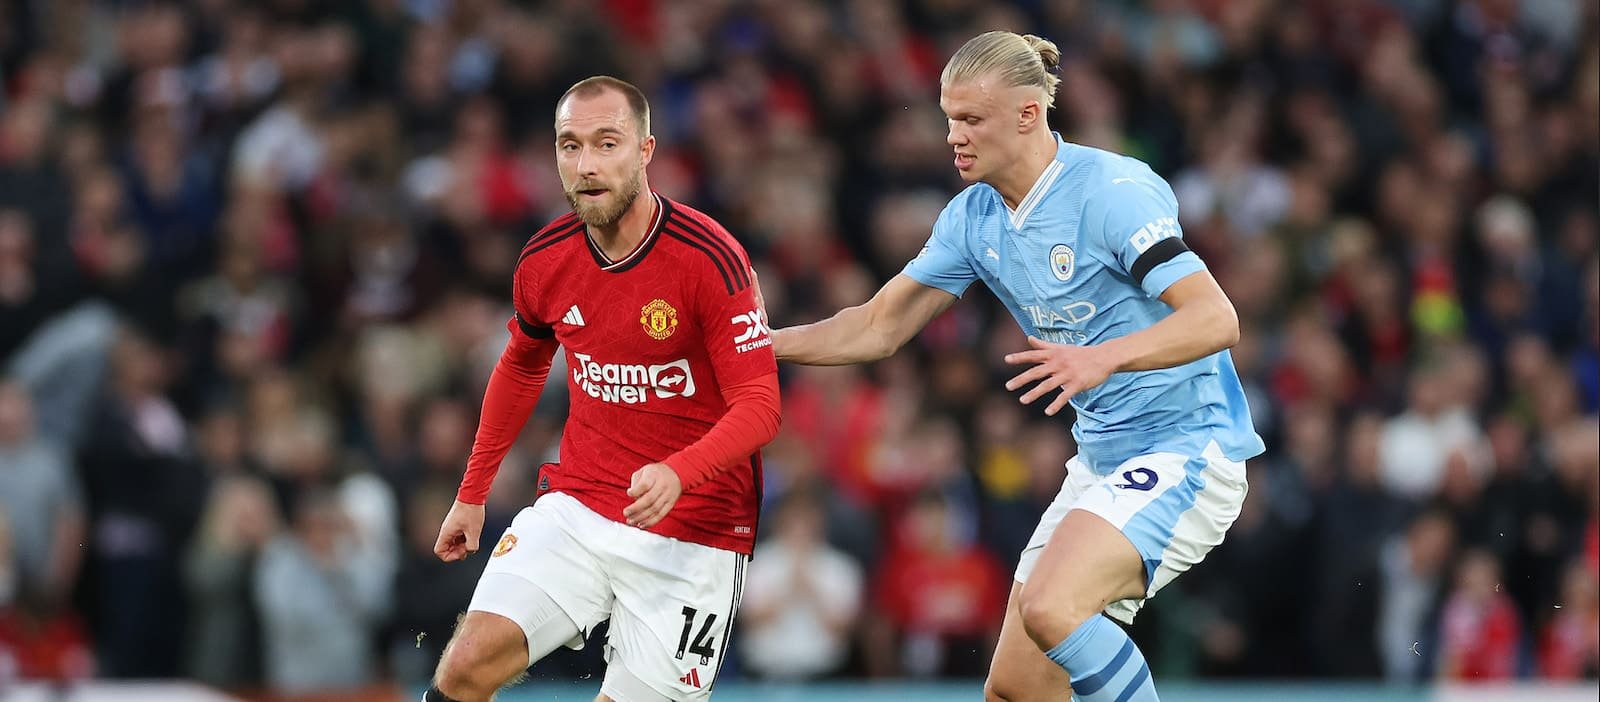 “I don’t know why”: Erling Haaland responds to Roy Keane chants from Man United fans – Man United News And Transfer News